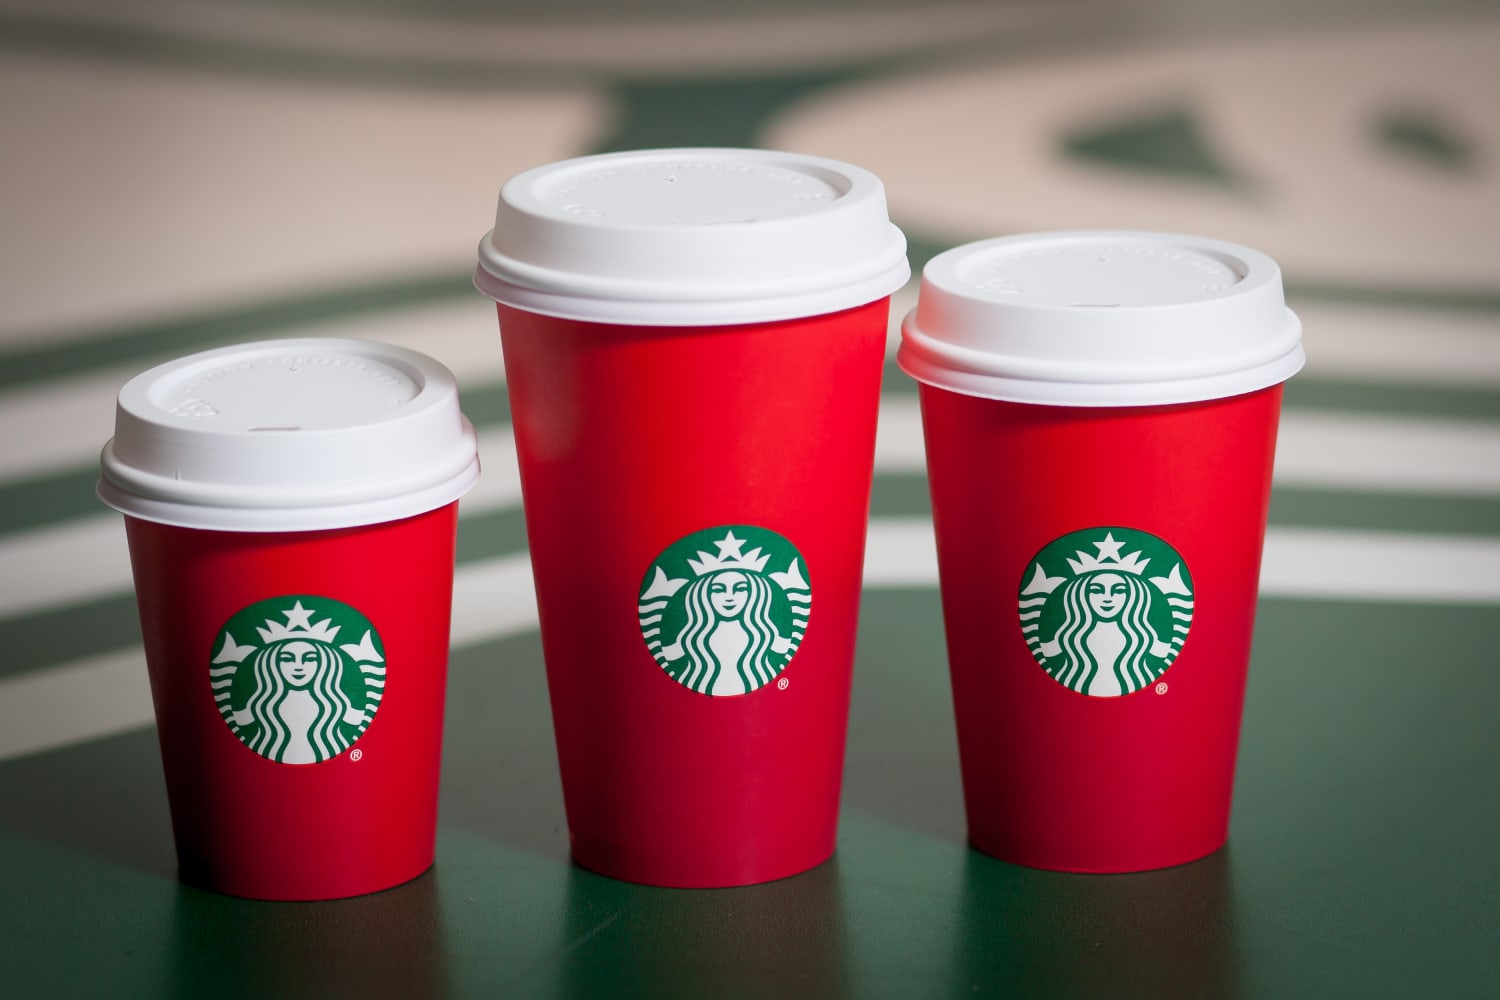 https://media-cldnry.s-nbcnews.com/image/upload/newscms/2019_45/1503575/starbucks_red_holiday_cups_2015-today-inline-191105.jpg